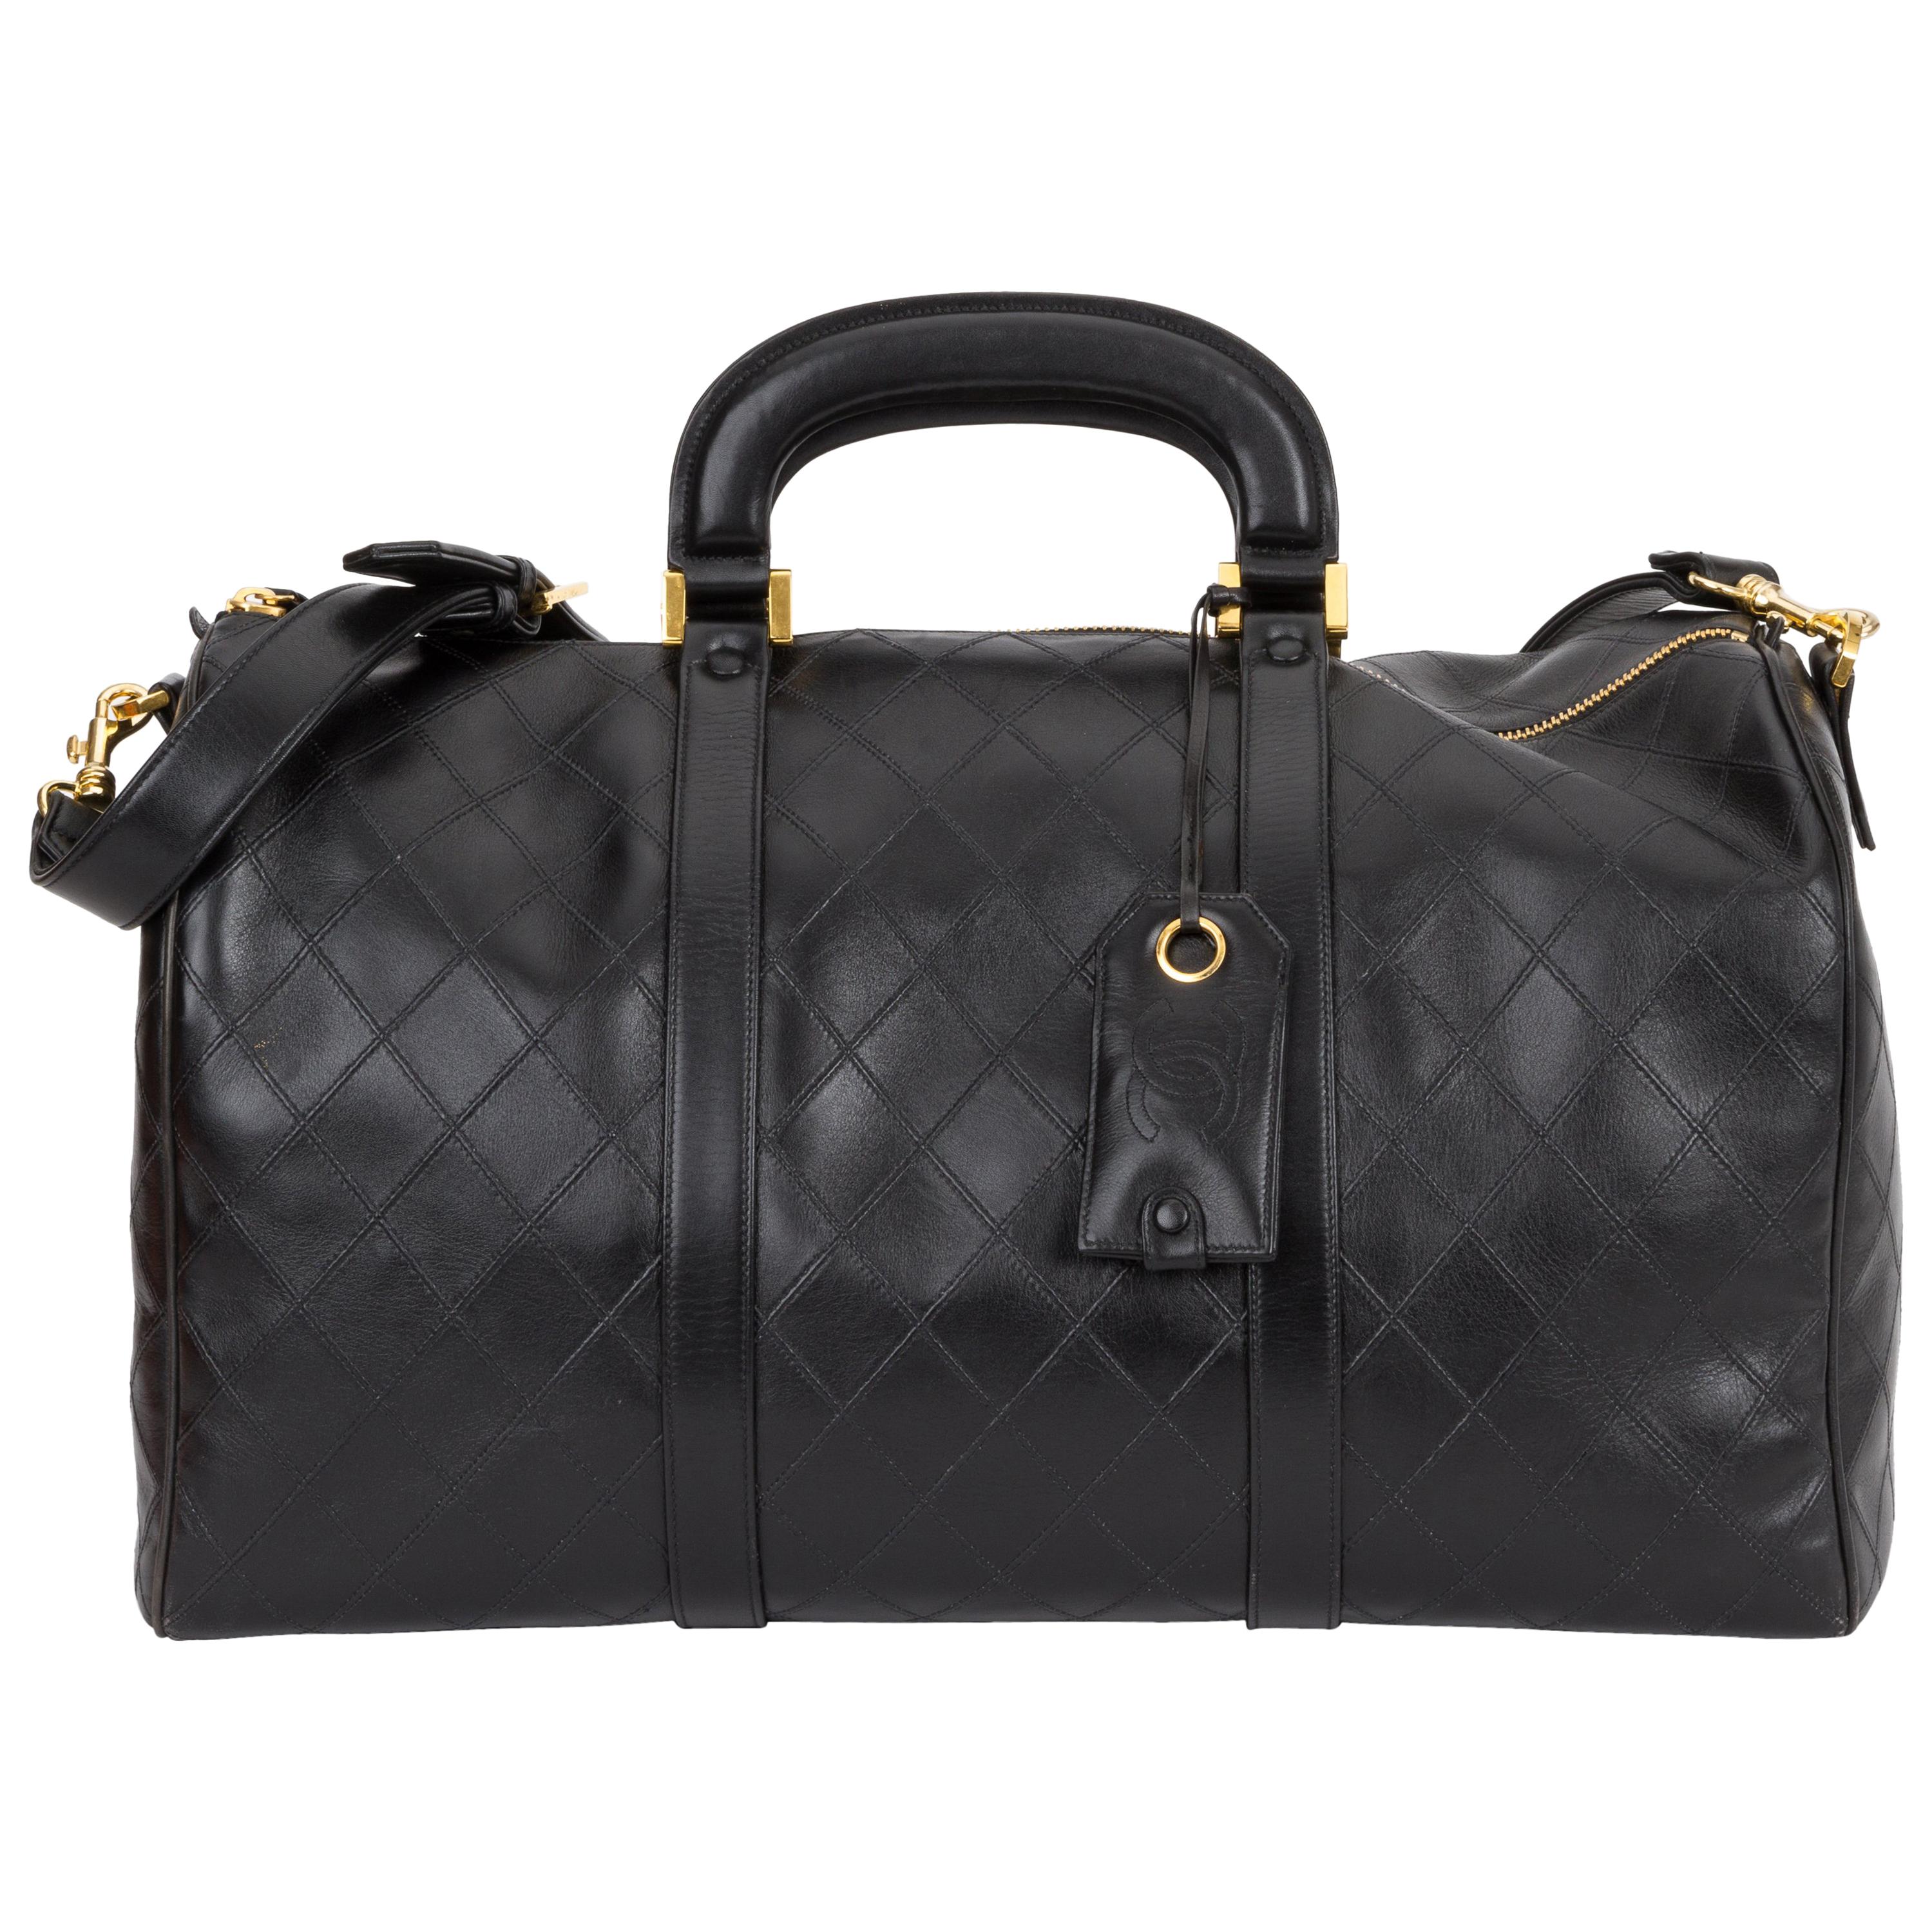 Chanel 1990's Rare Black Diamond Quilted Duffle